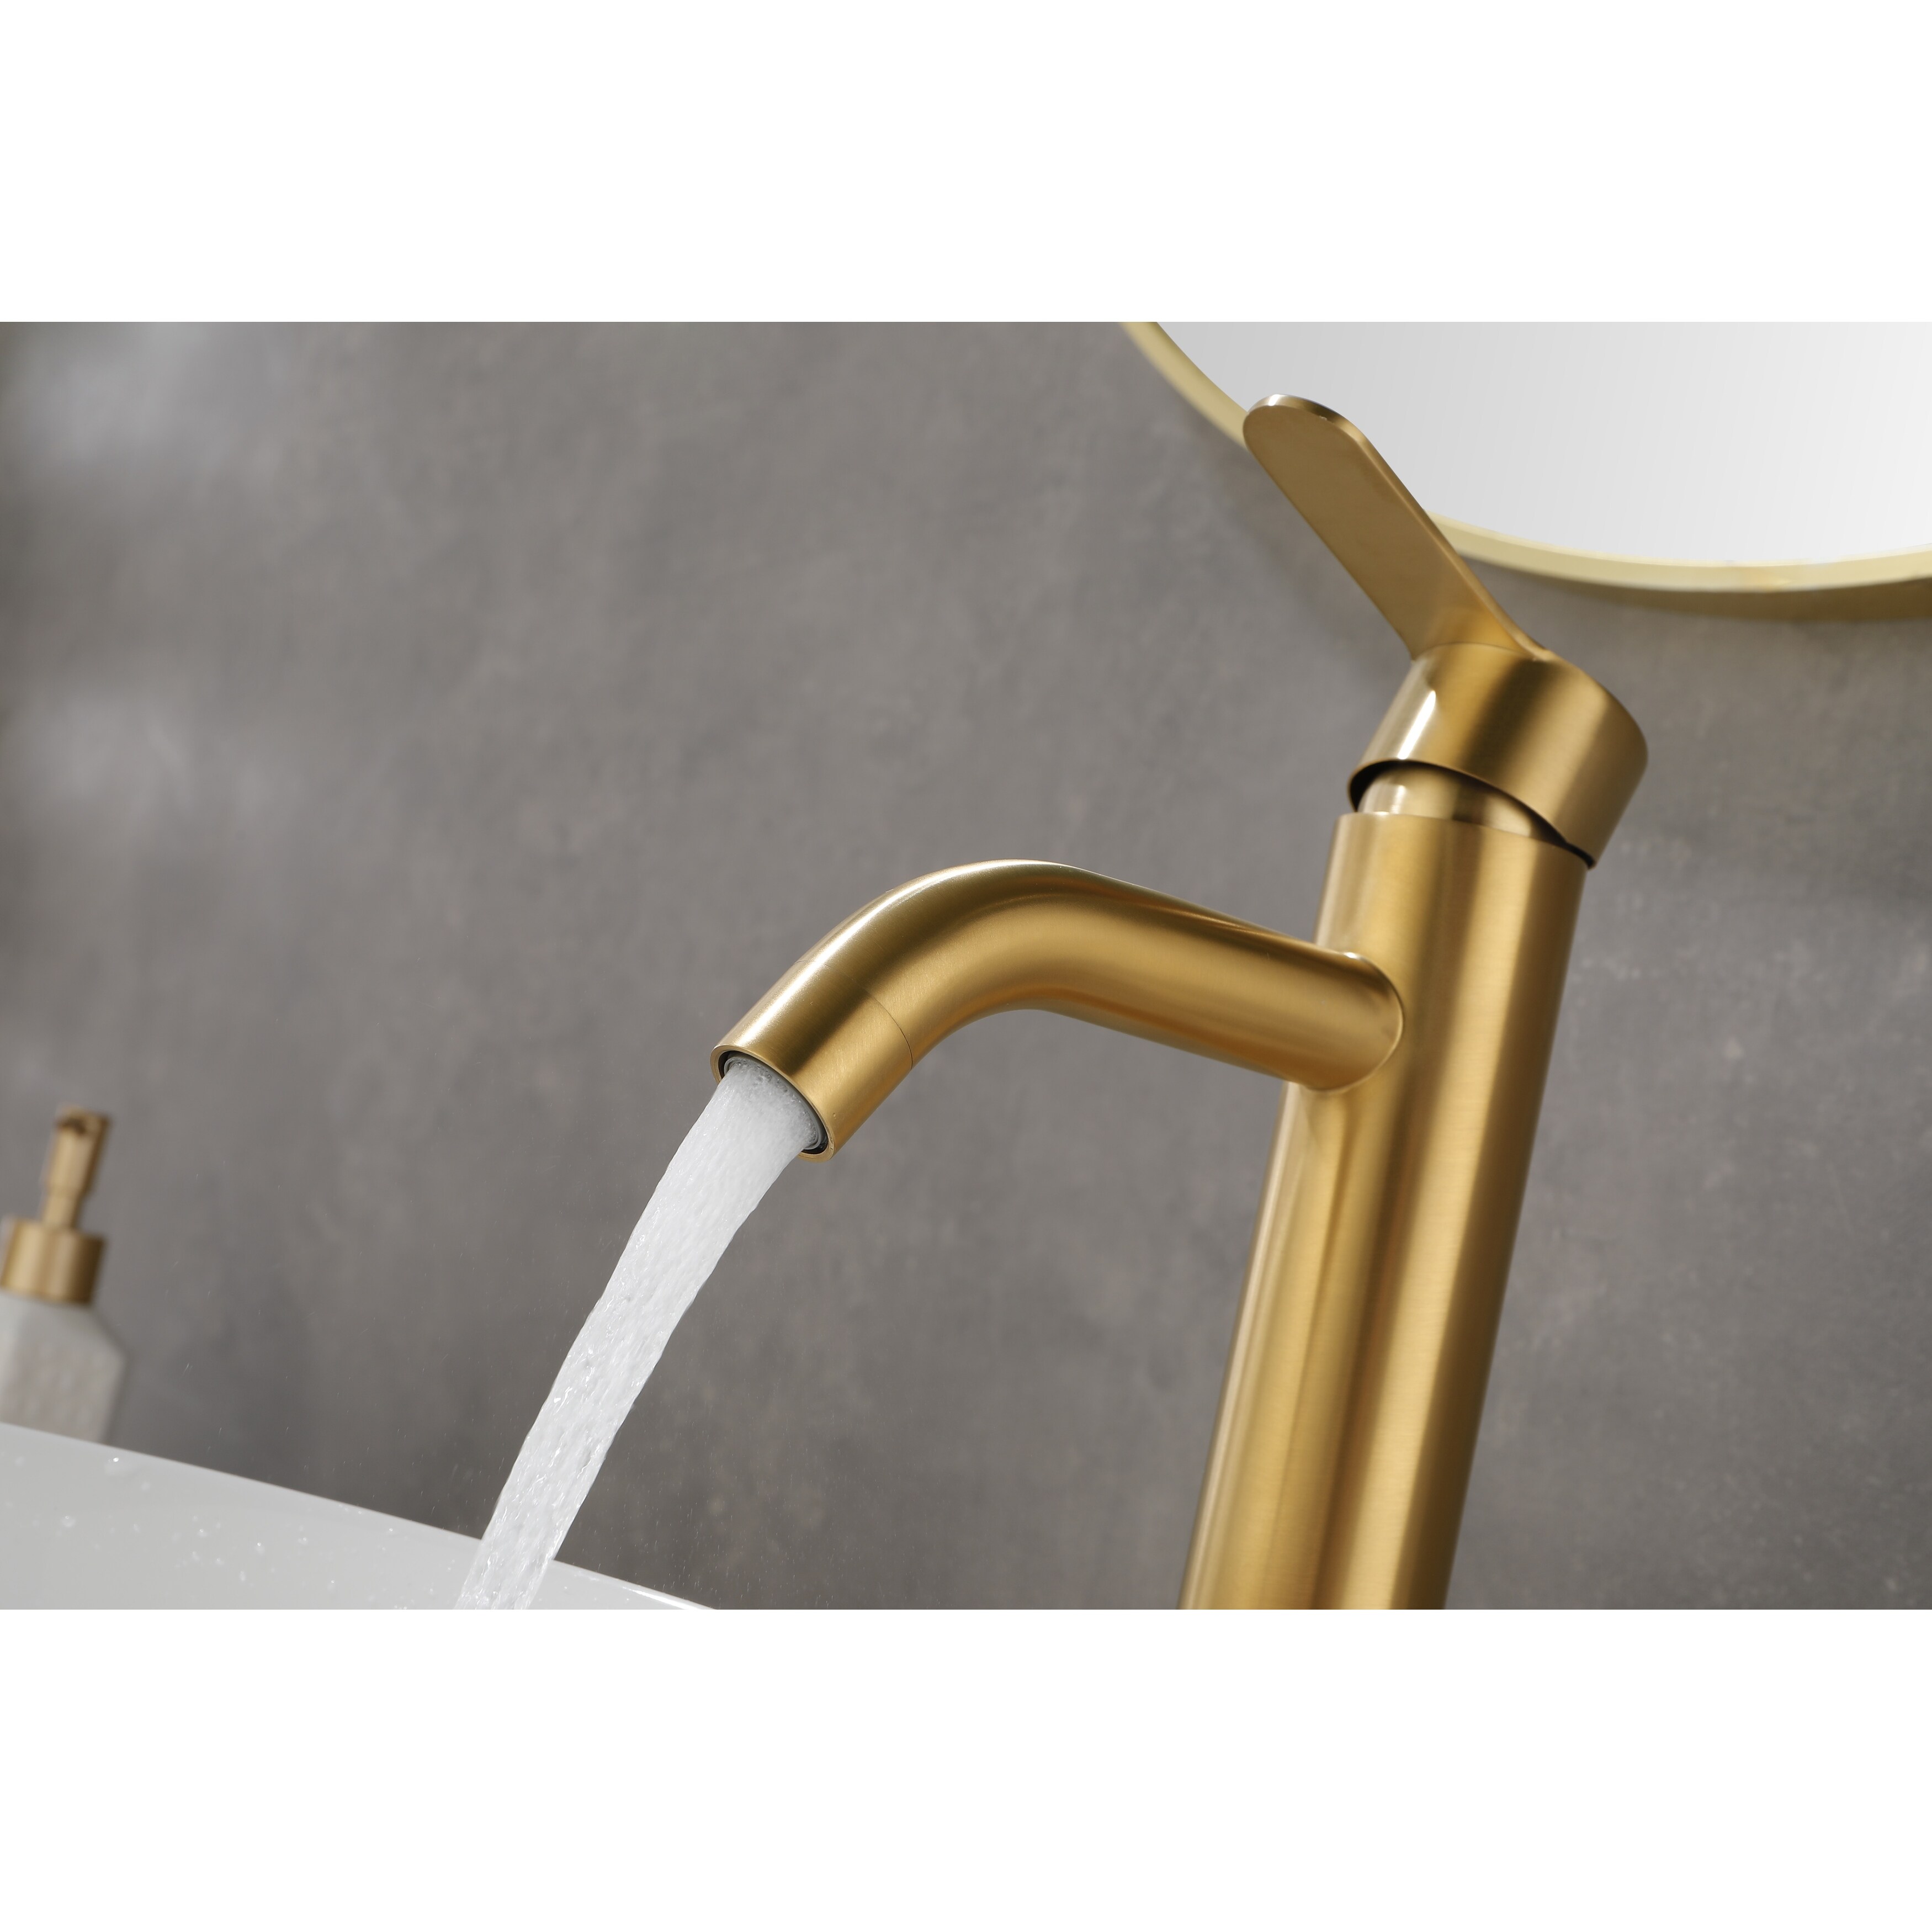 Waterfall Spout Tall Bathroom Faucet with Single Handle,Gold - Deck Mount